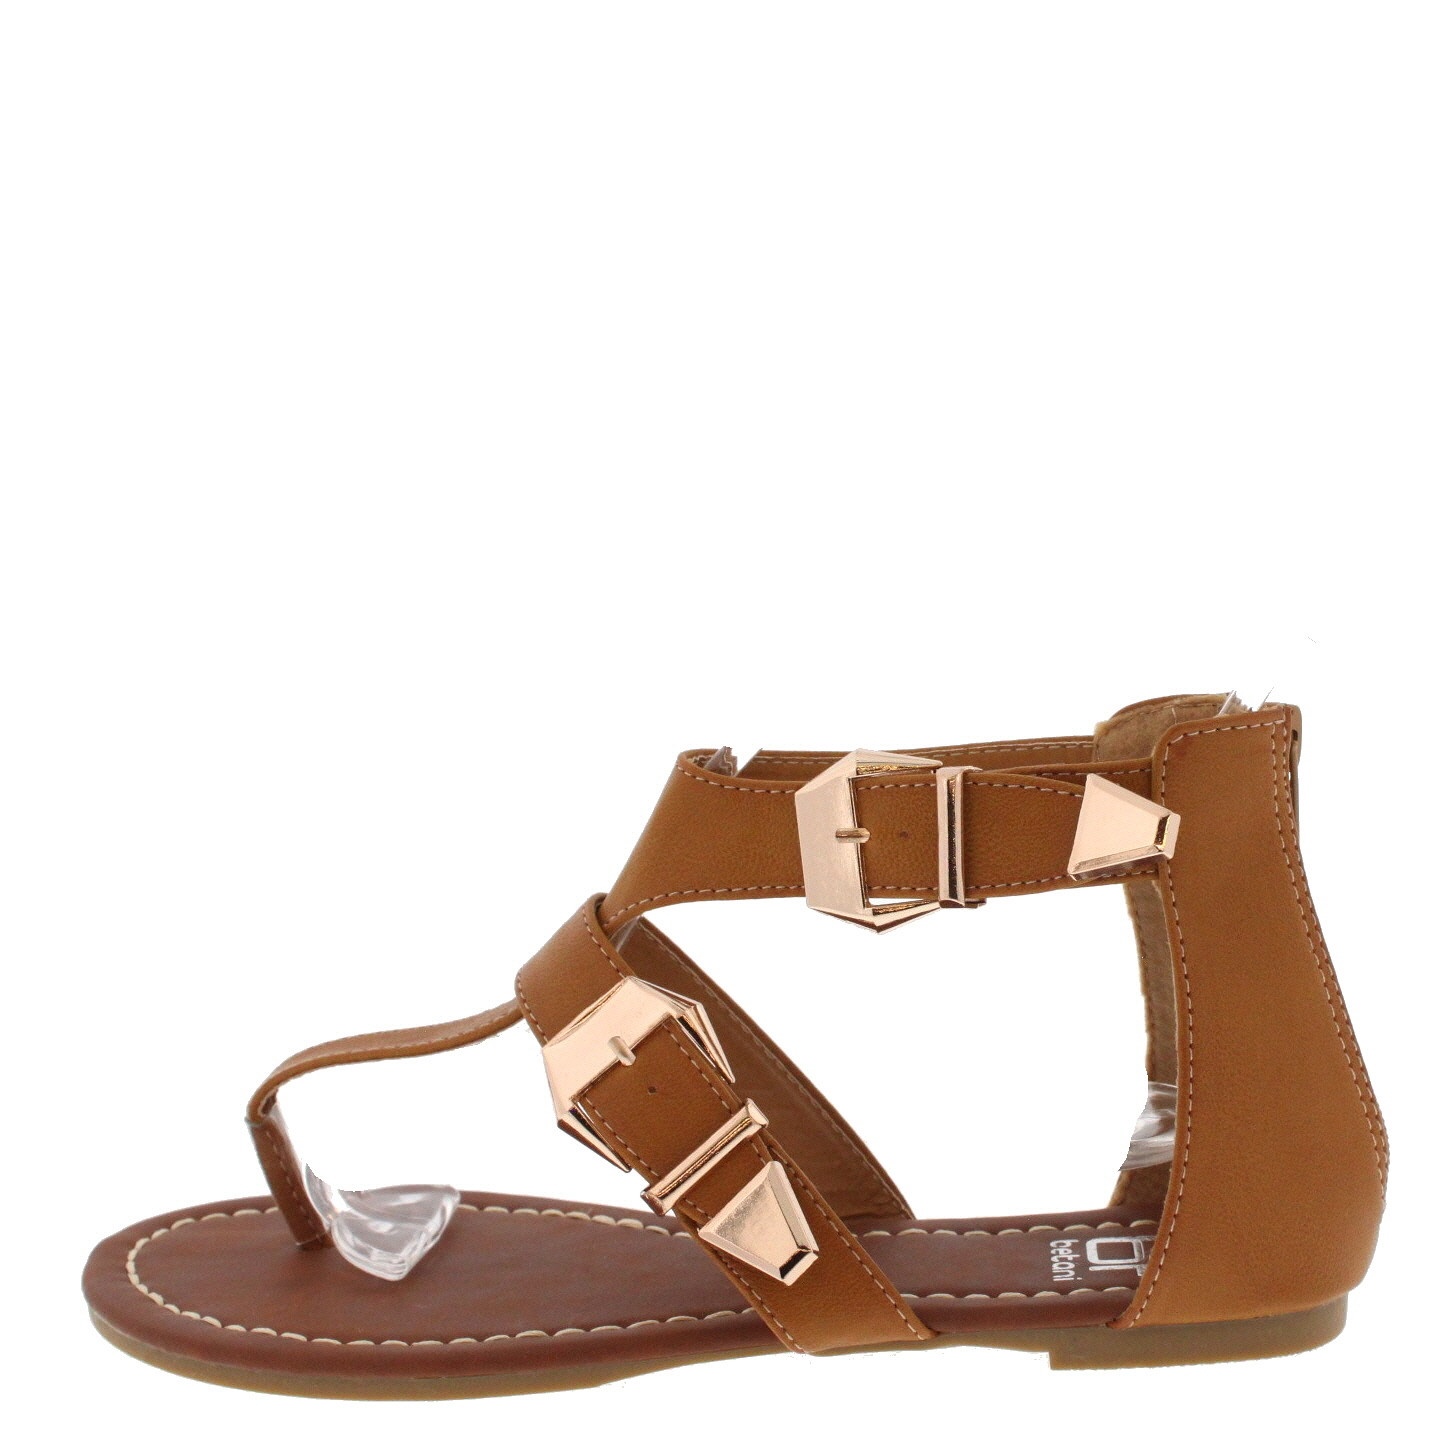 Gladiator sandals in camel color and gold buckles sizes 6, 6 1/2, 7, 7 1/2, 8, 9 $29